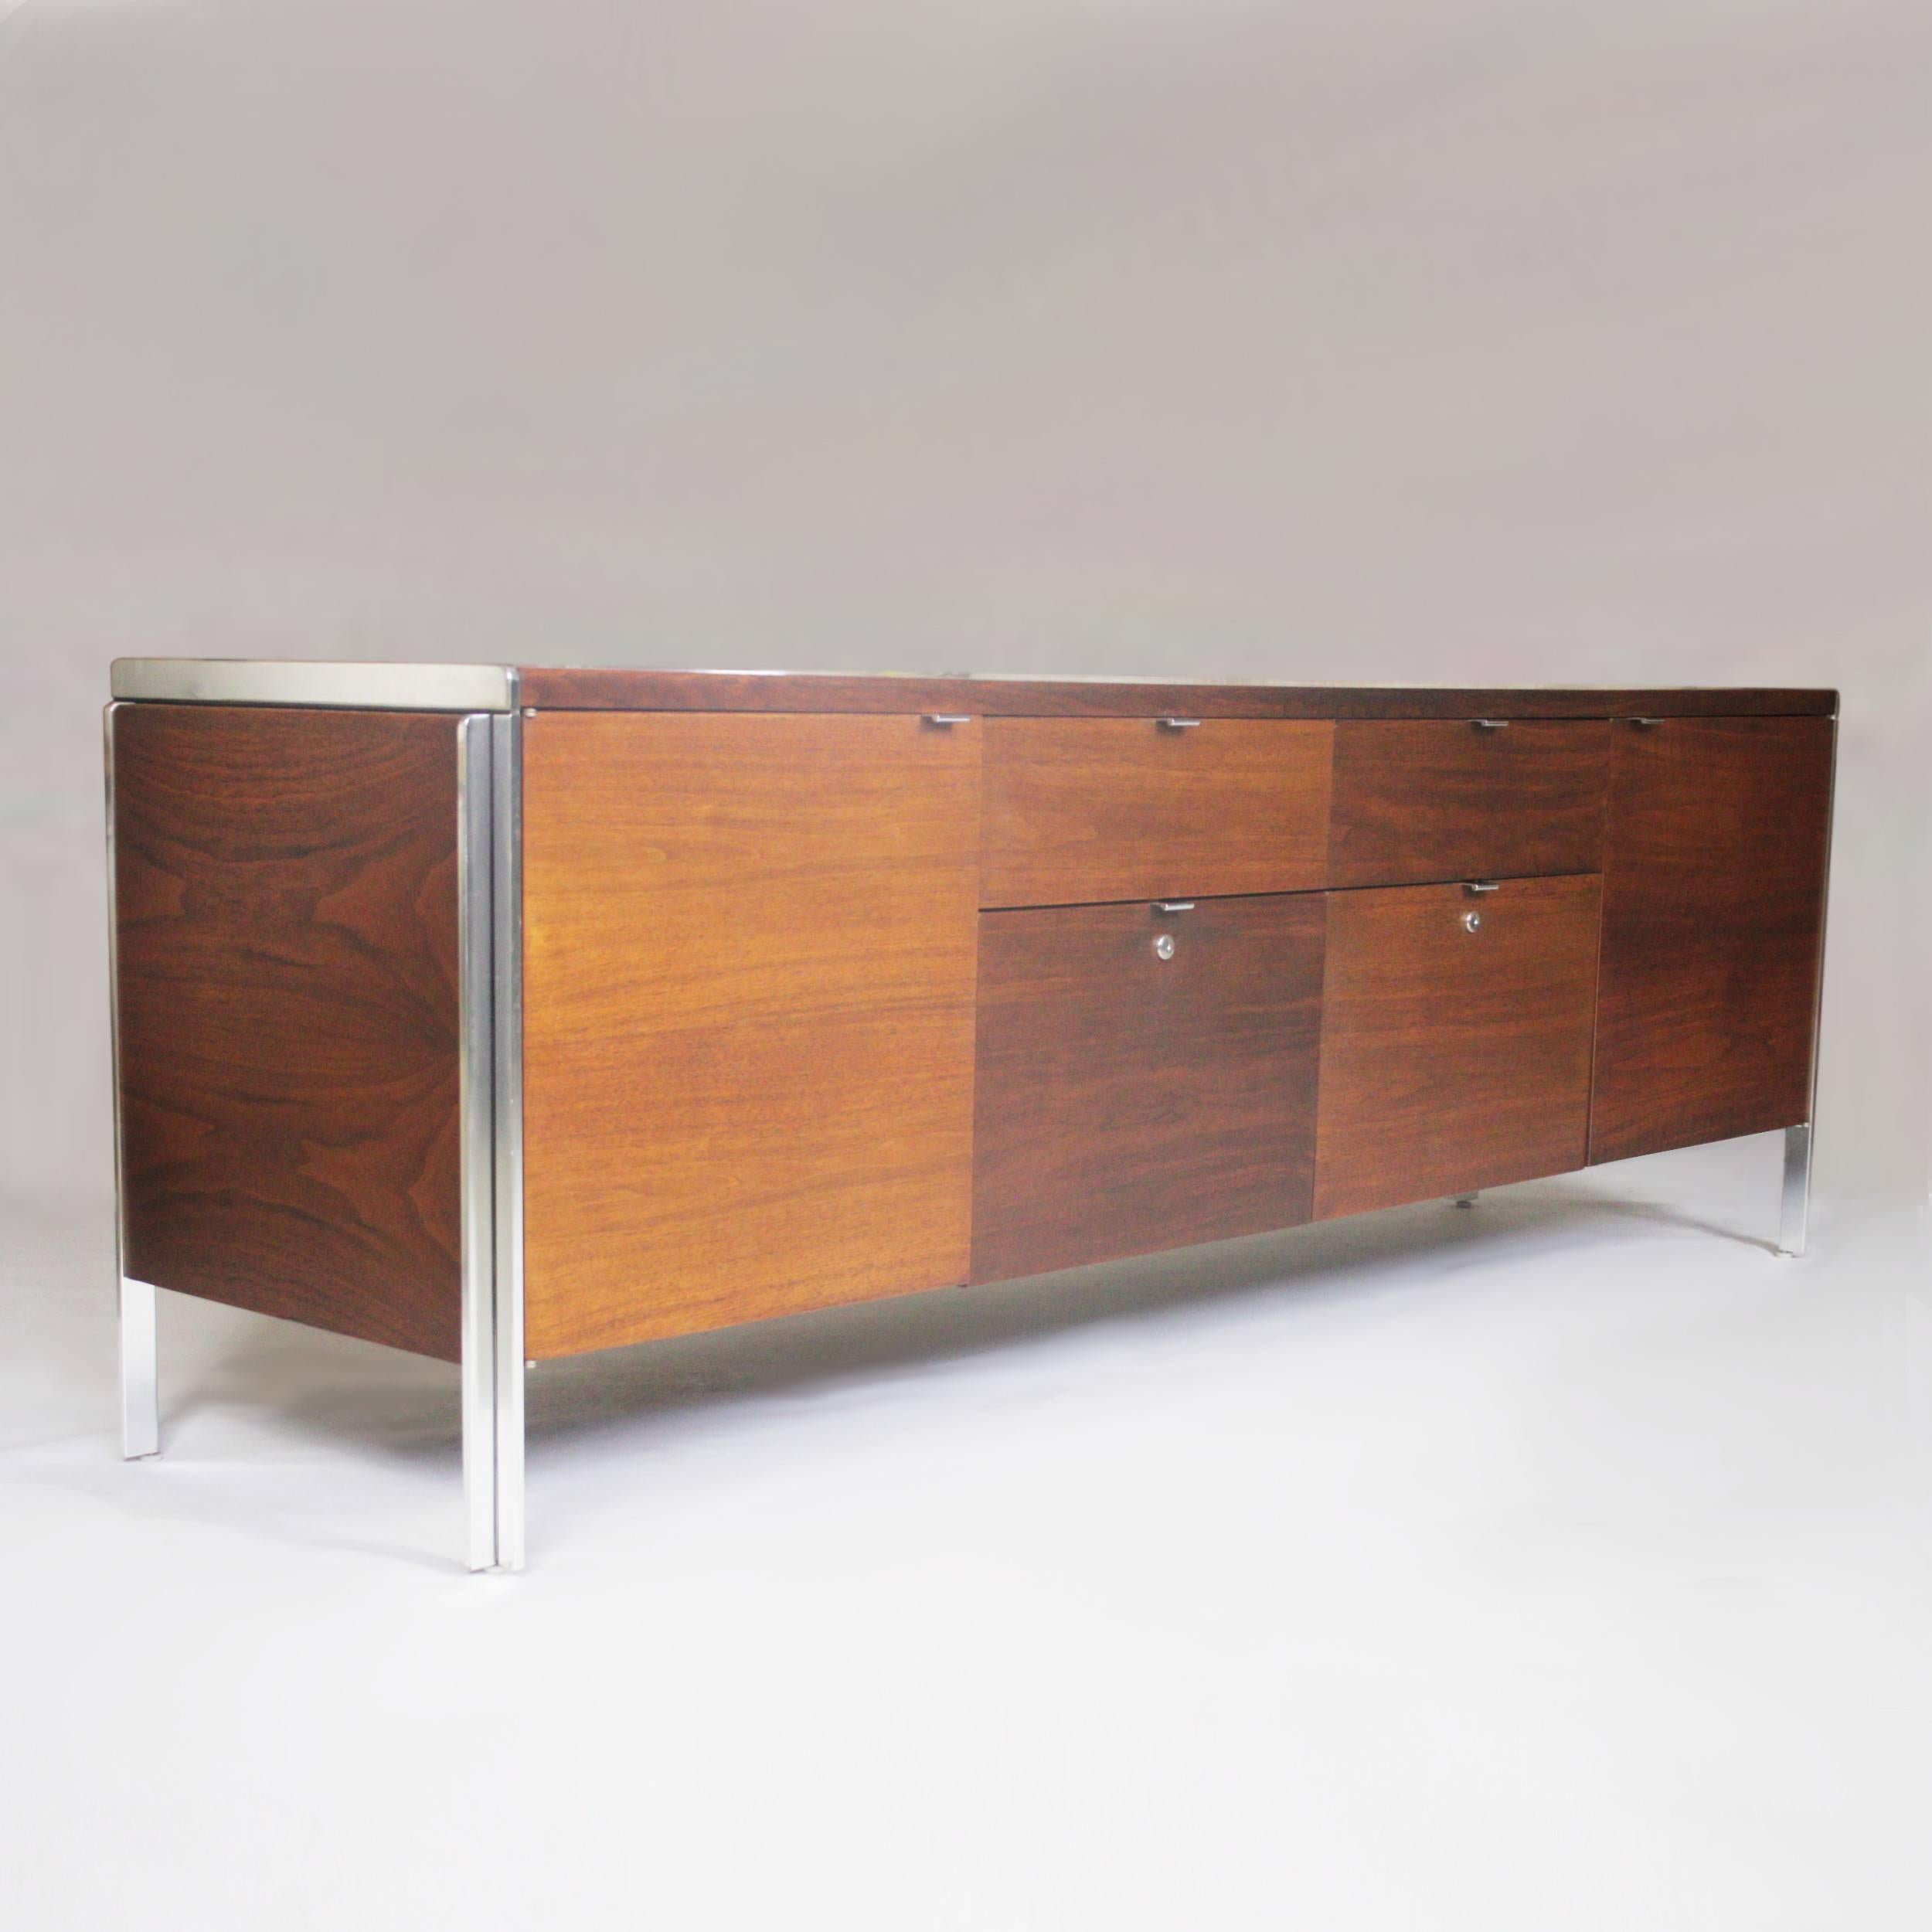 This wonderful Mid-Century Modern credenza by Stow Davis has everything going for it. With its beautifully clean lines and touch of chrome accents this credenza is the epitome of 1970s chic. At 79